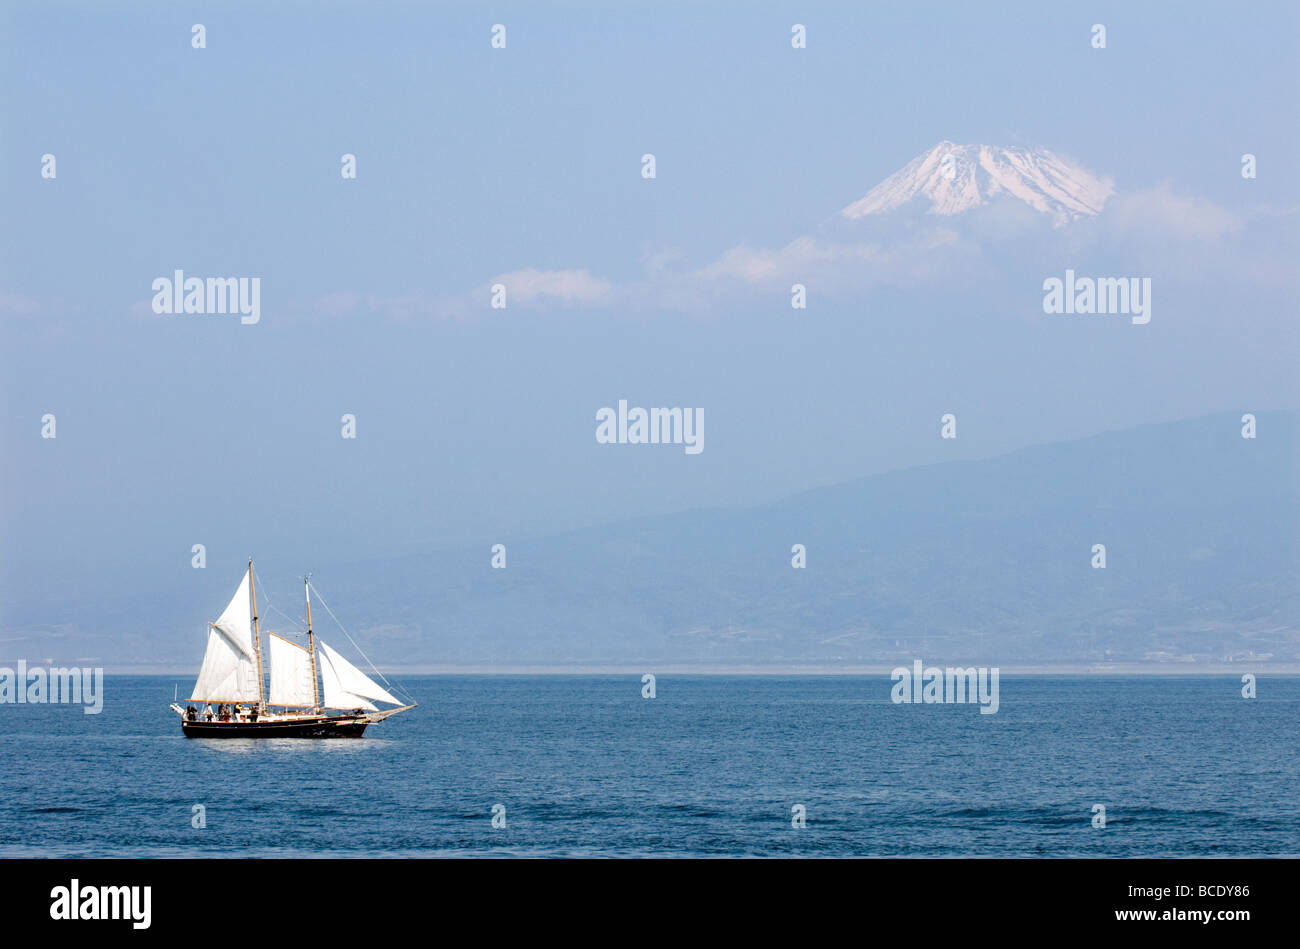 A schooner sailboat on the Pacific Ocean slowly passing a partially obscured Mount Fuji near Numazu Japan Stock Photo